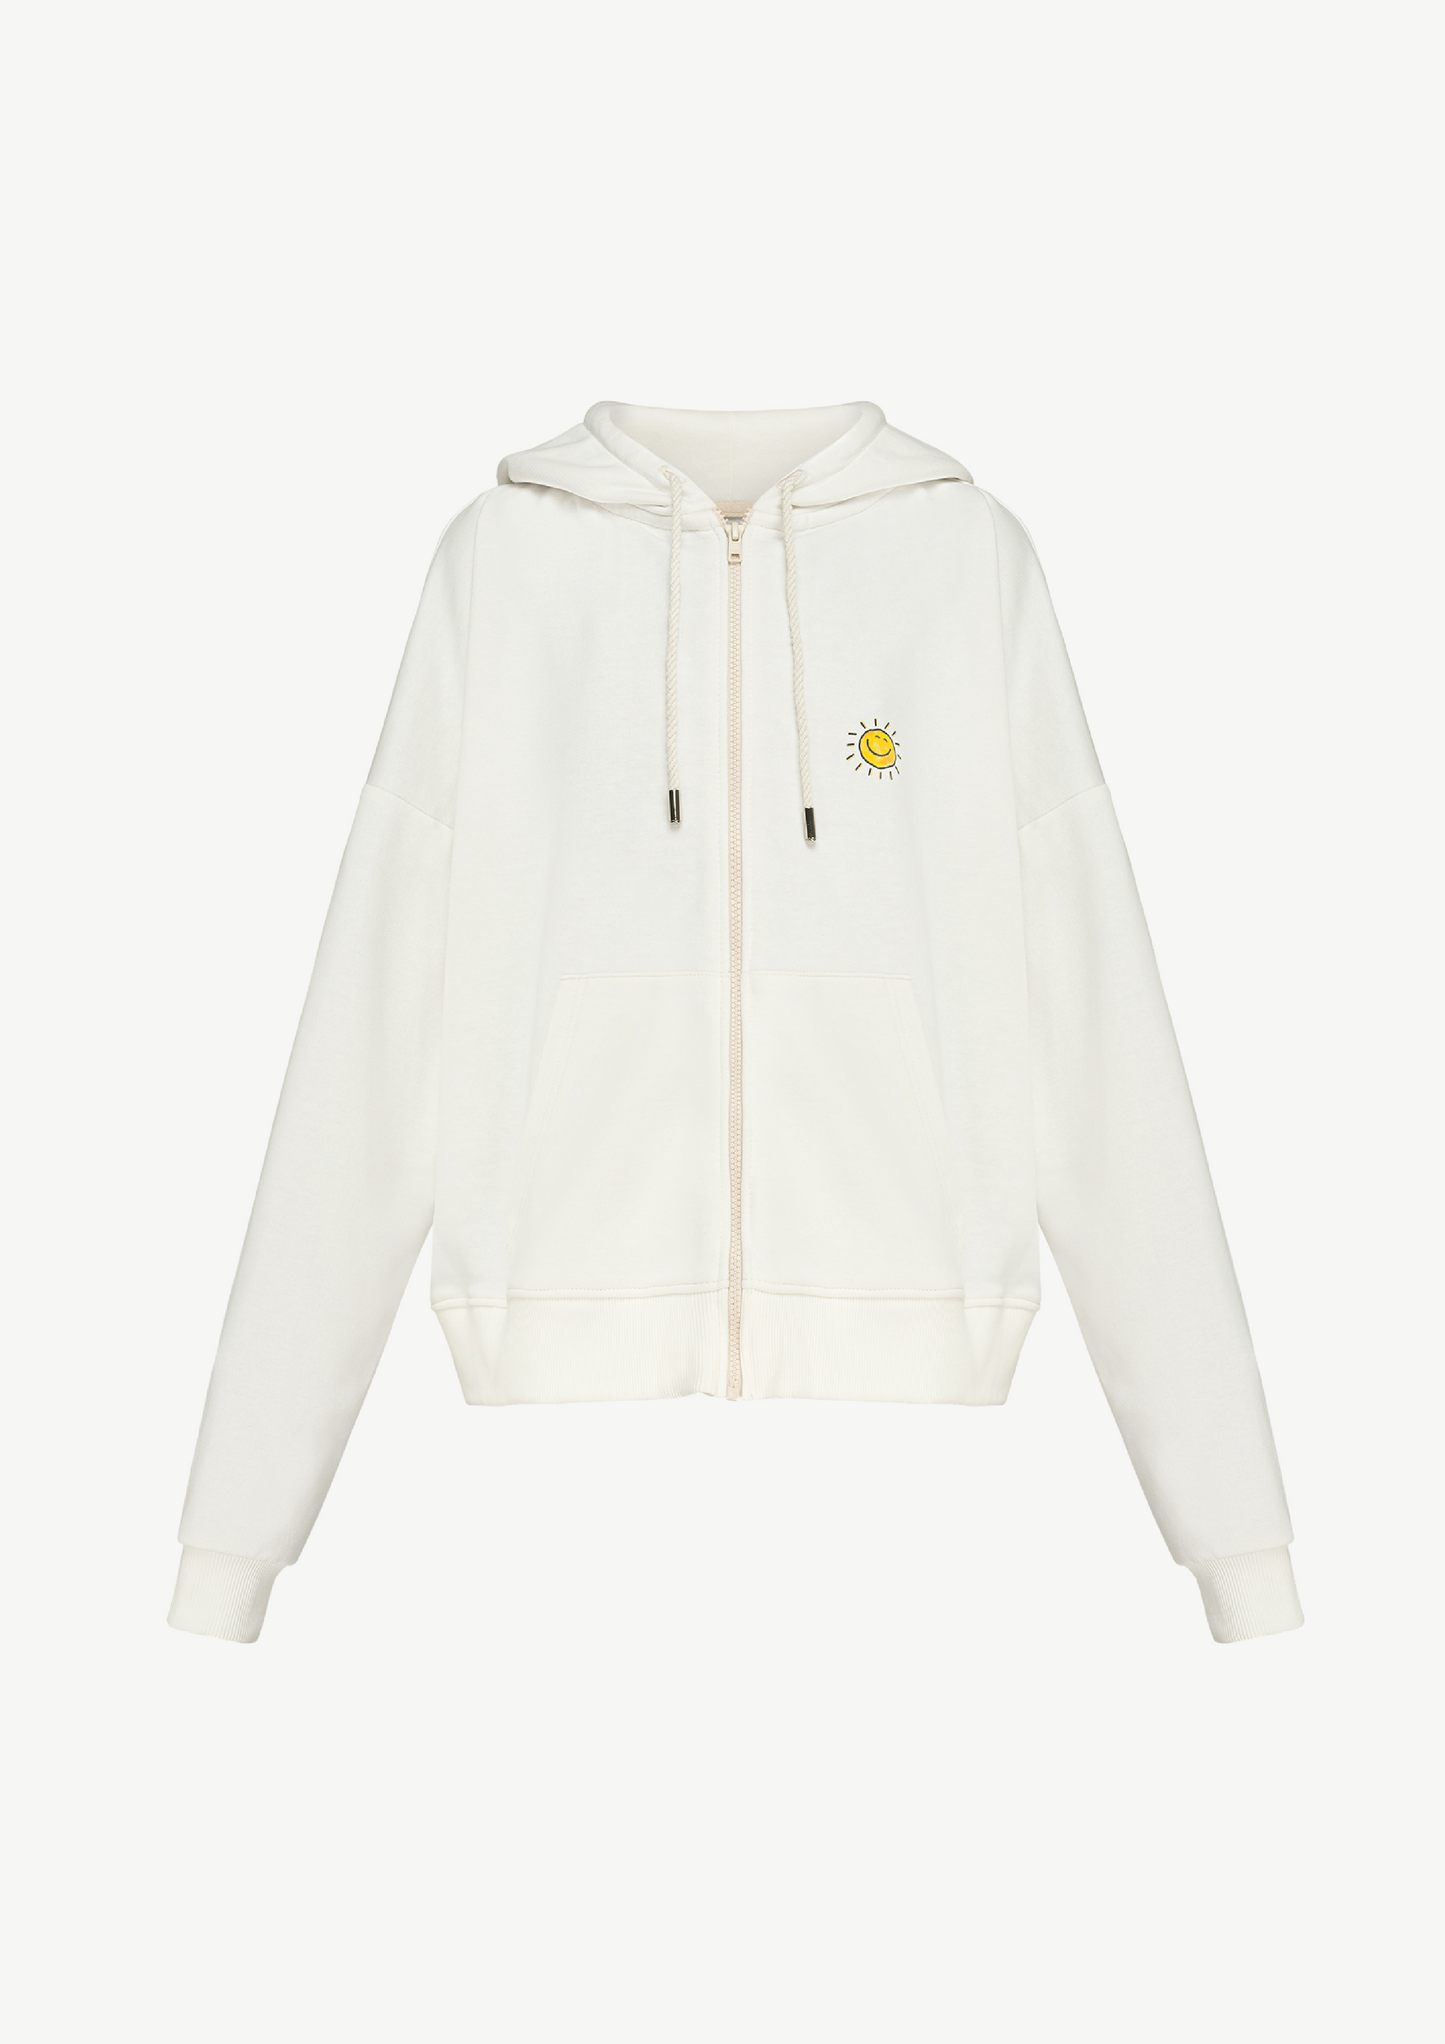 OVERSIZED ZIP THROUGH HOODIE WITH PRINT IN WHITE